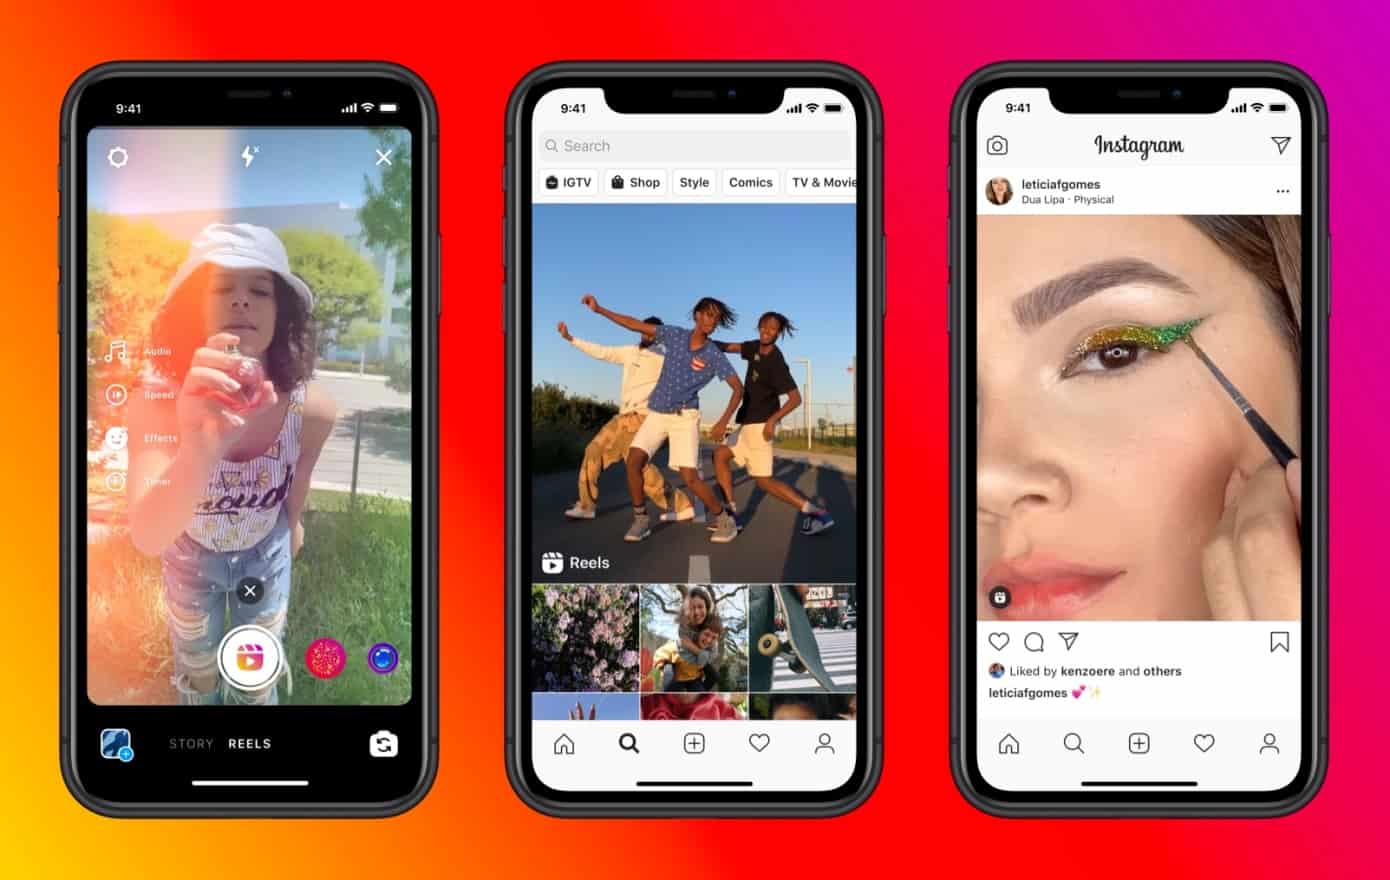 Instagram users will soon be reply to stories by sending their drawings